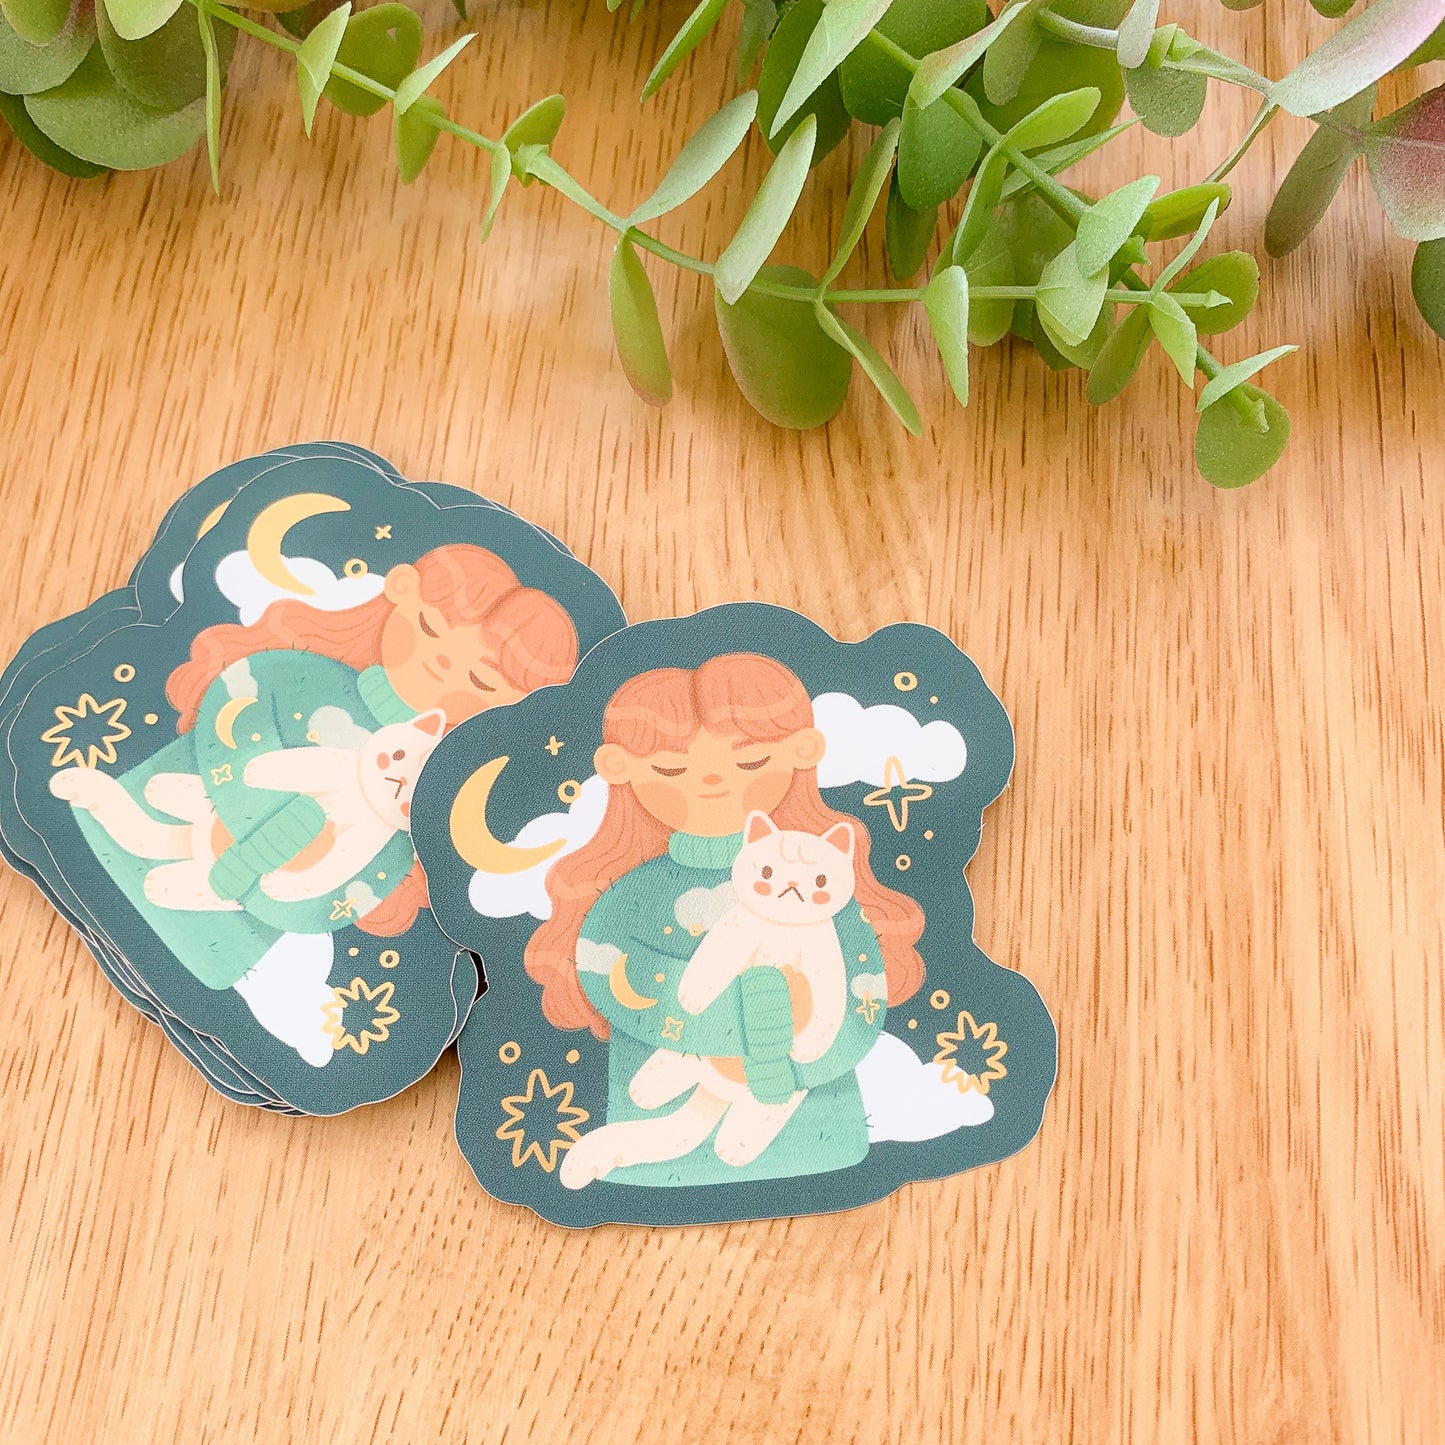 Moon and Clouds Girl Metallic Sticker - Limited Edition Patreon vinyl stickers